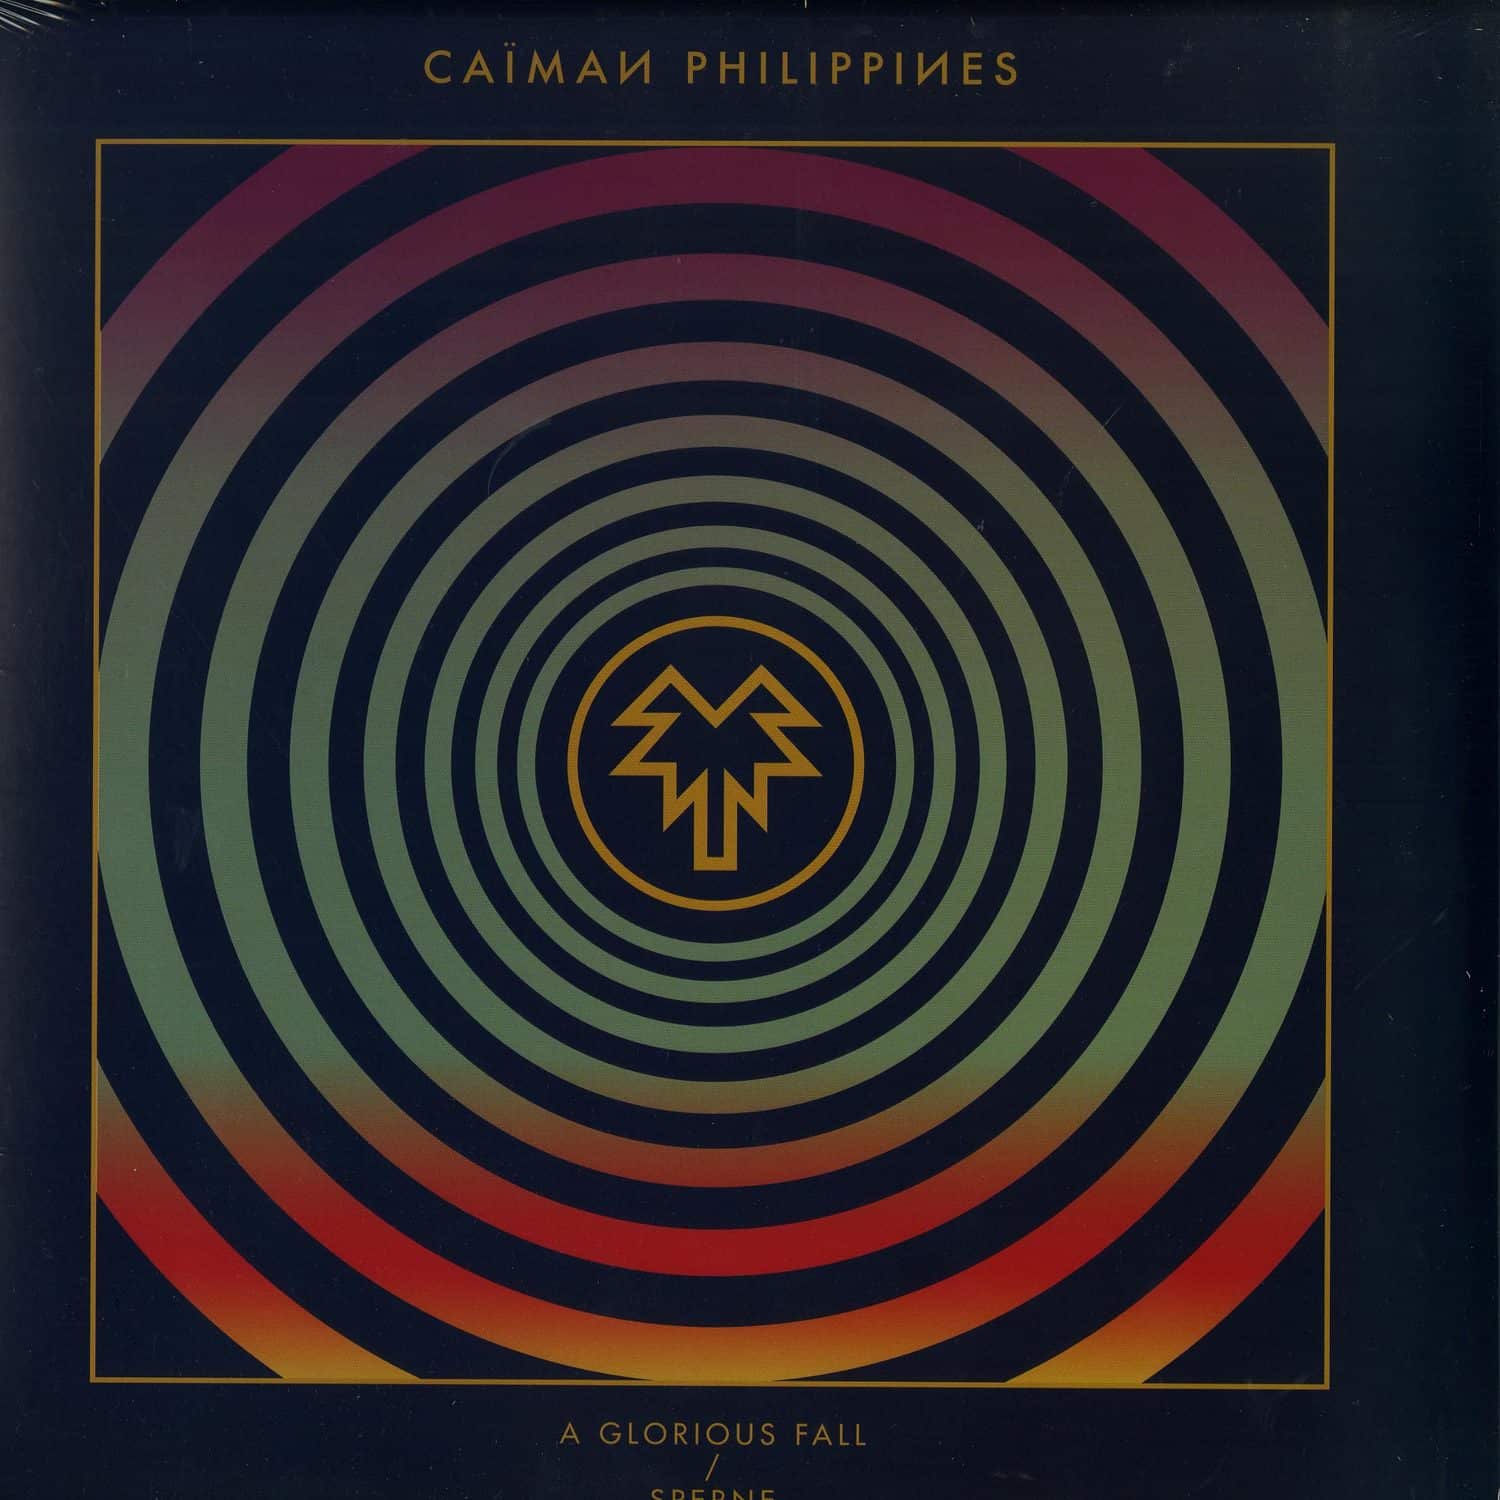 Caiman Philippines - A GLORIOUS FALL / SPERNE 